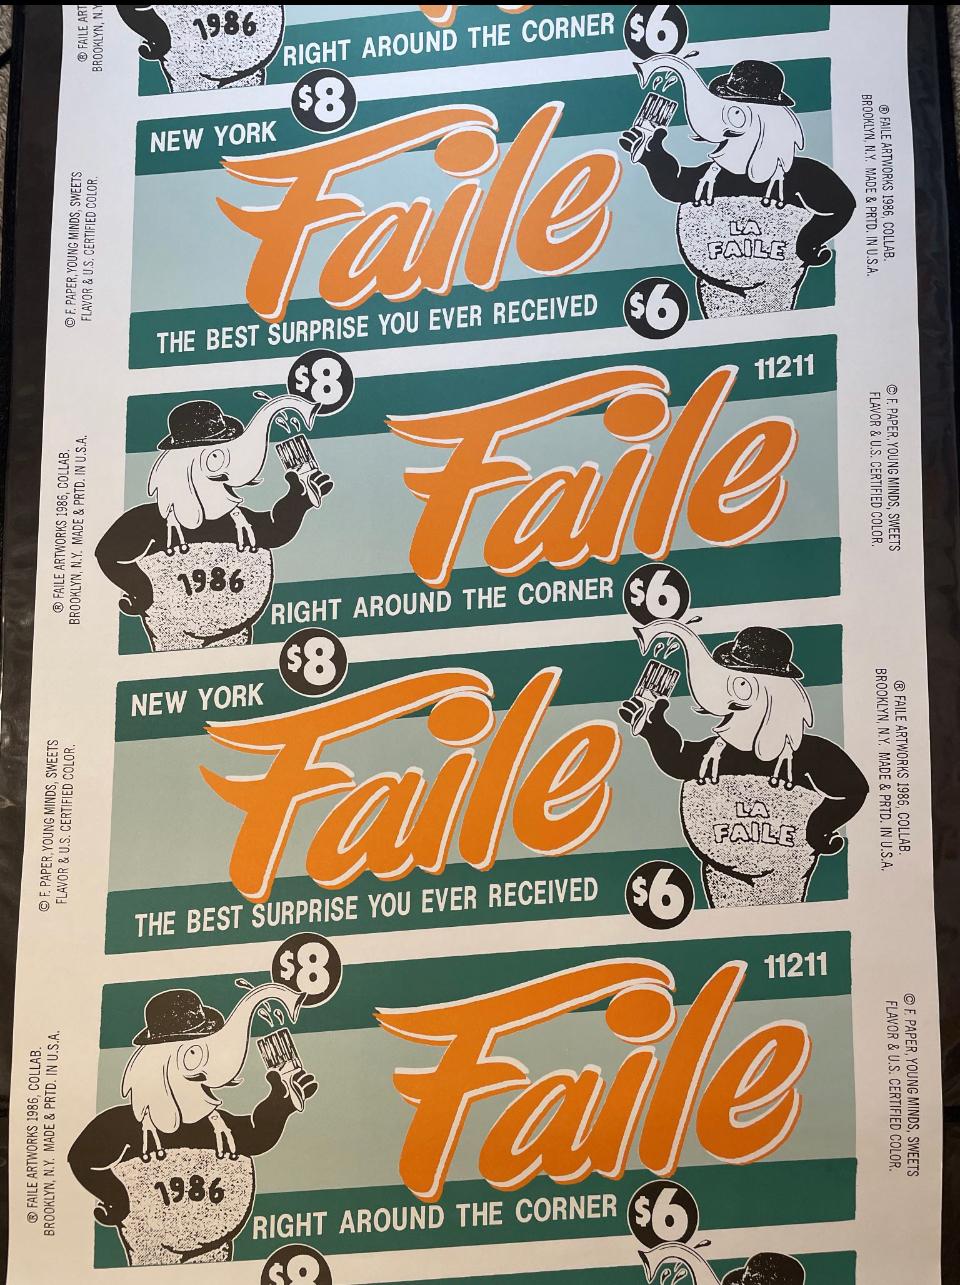 POST NO BILLS launches with a unique ten-year retrospective from the
acclaimed Brooklyn-based artist collaborative− FAILE.

Recognized for their bold graphic imagery gracing street, museum and
gallery walls worldwide, FAILE− the multimedia artist